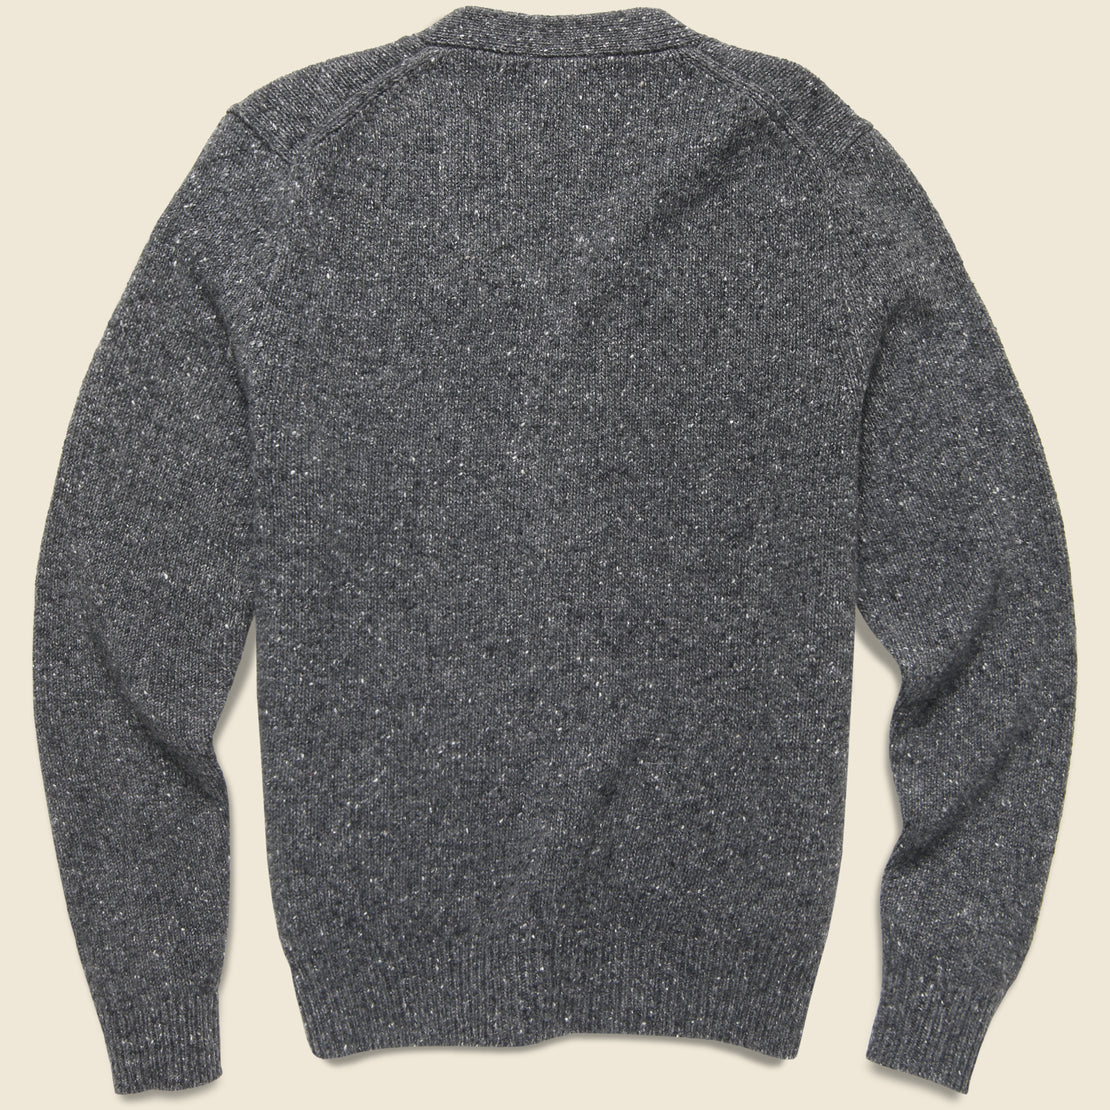 Donegal Cardigan - Charcoal